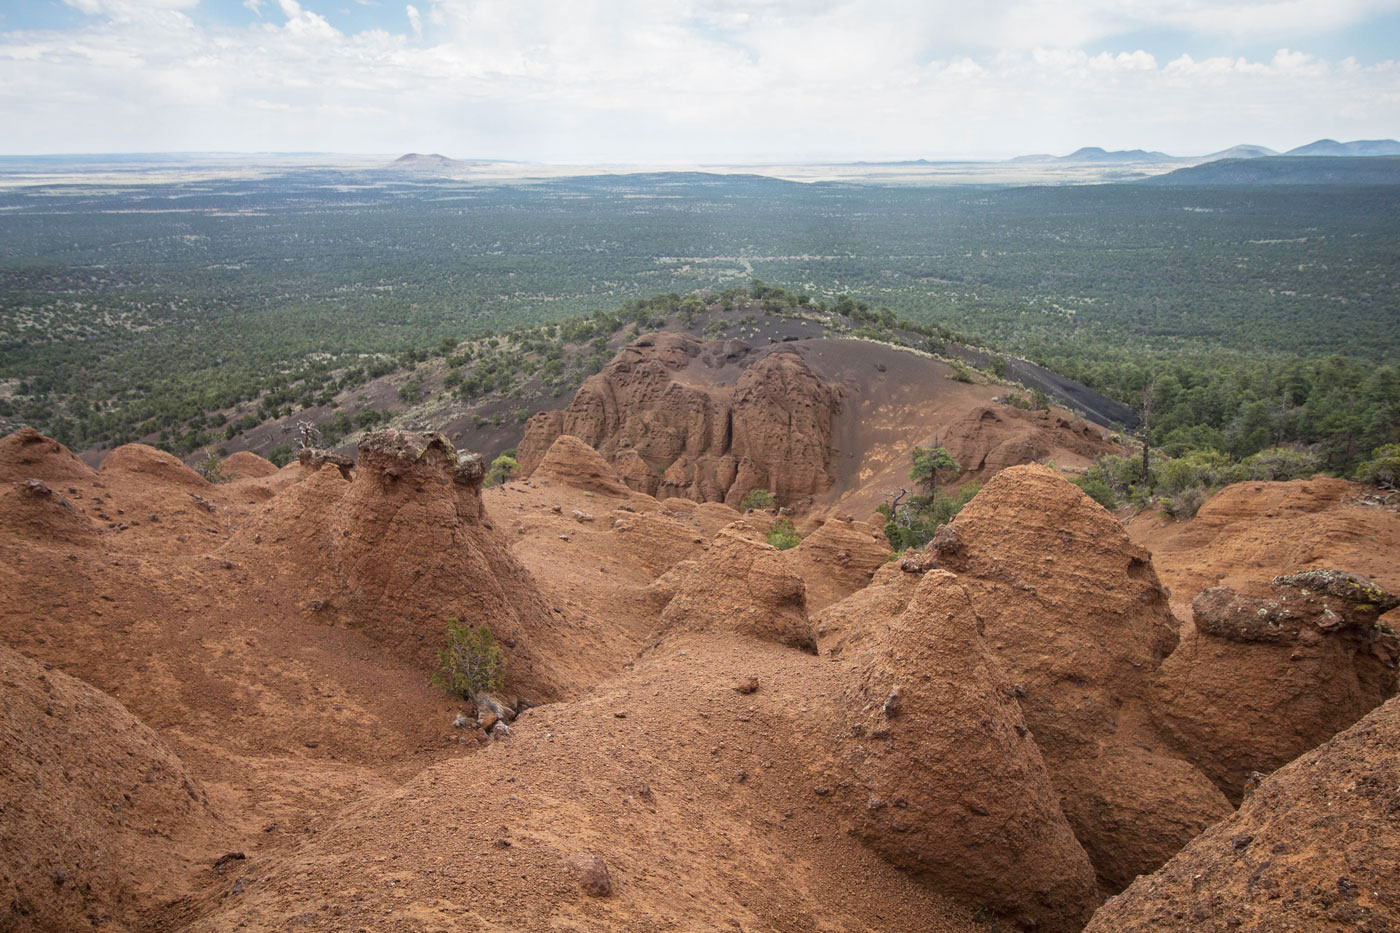 Hike Red Mountain in Coconino National Forest, Arizona - Stav is Lost